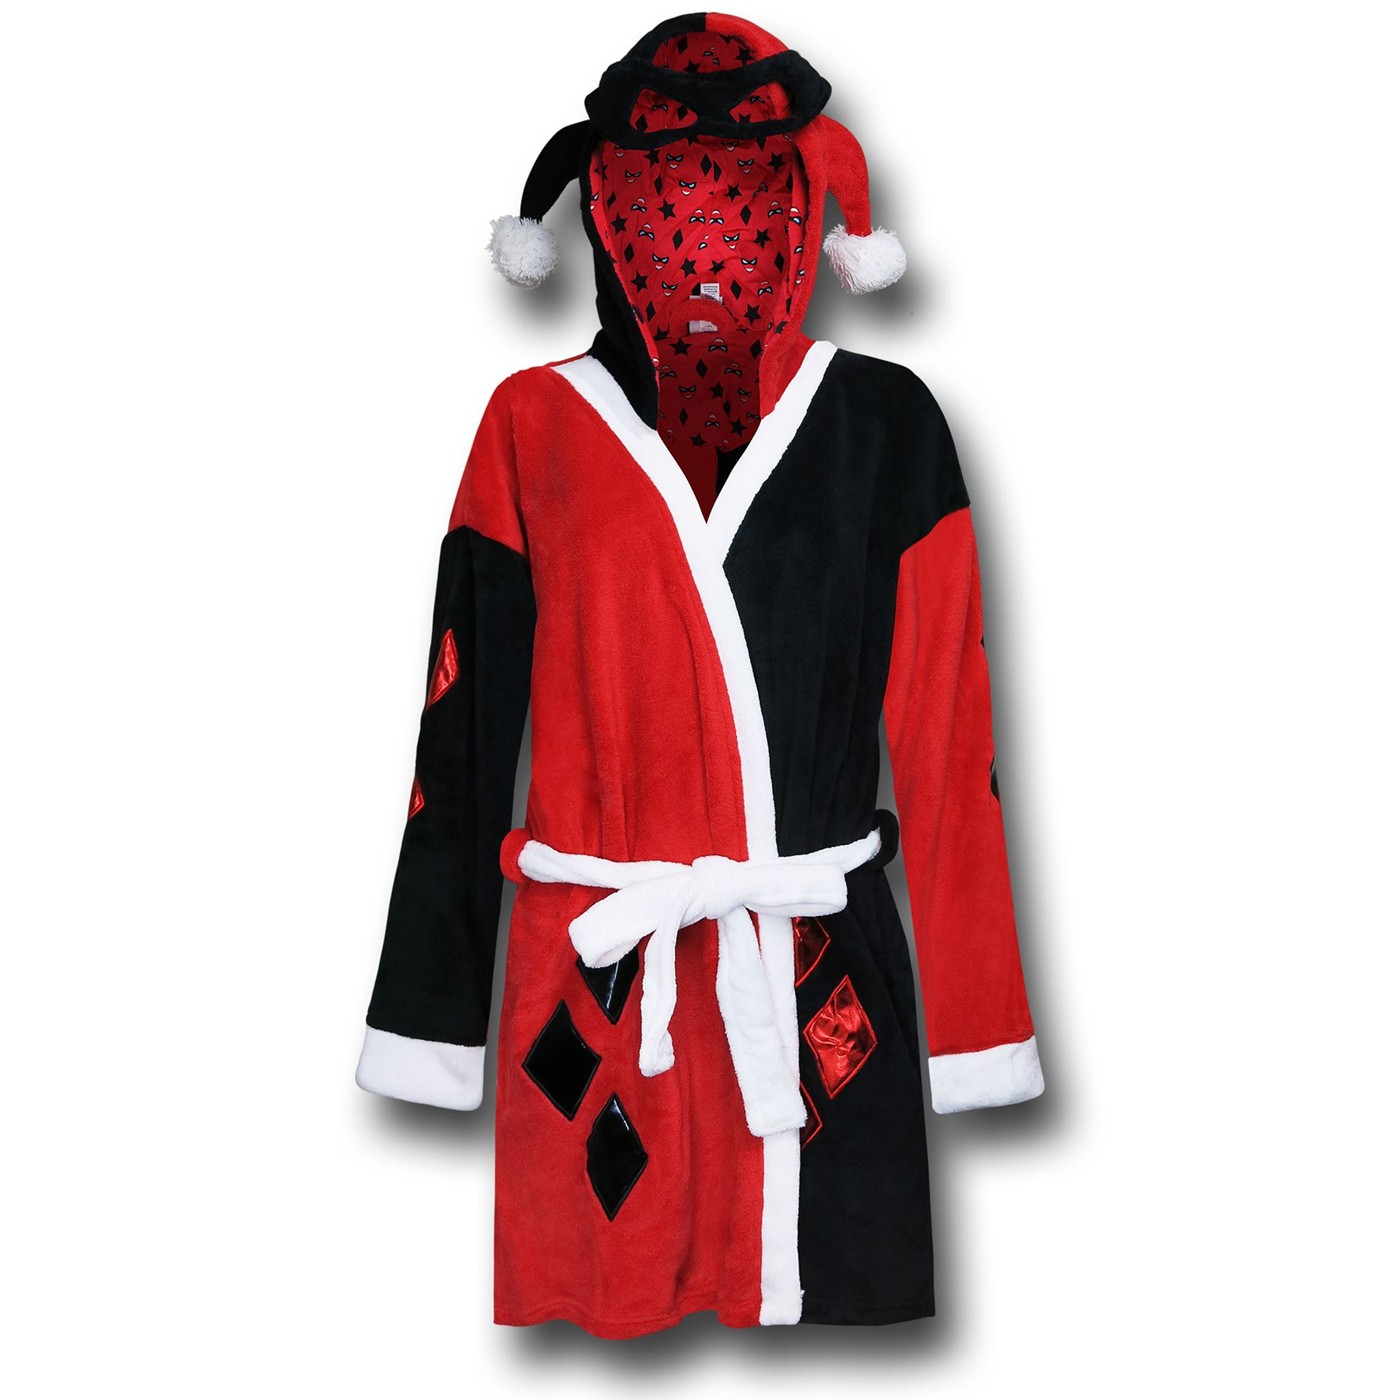 Harley Quinn Robe Cosplay Suicide Squad Cosplay Costume Hooded Bathrobe Plush